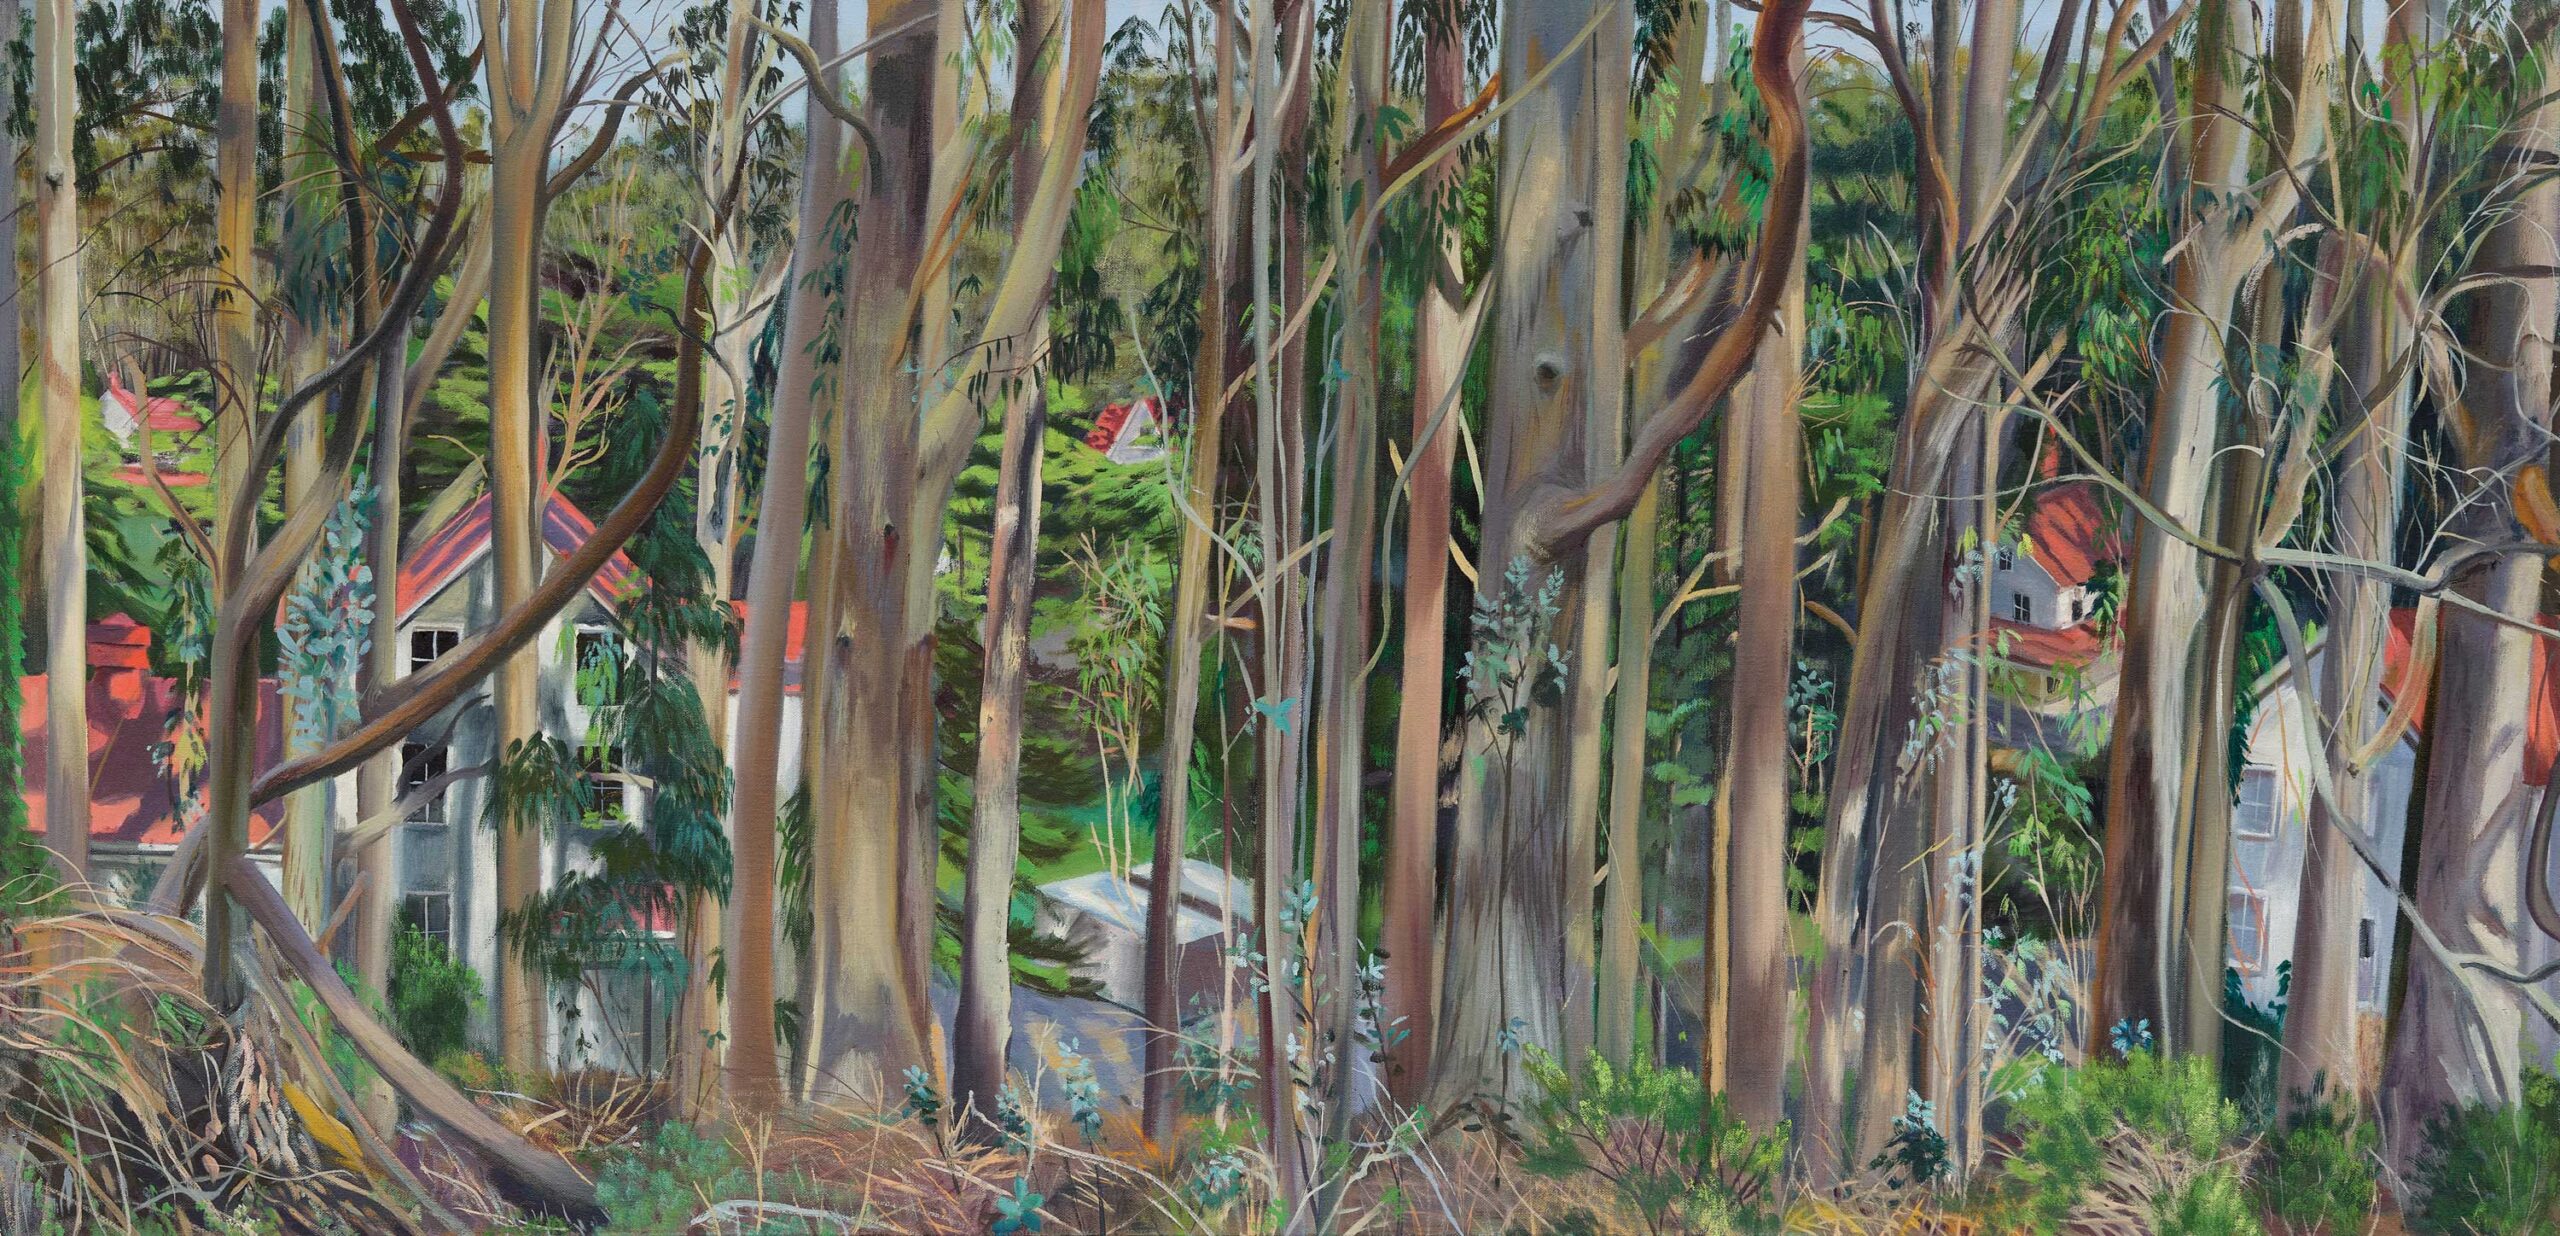 Tom Colcord, "Glimmer of Houses," 2021, oil, 23 x 47 in., Available from John Natsoulas Center for the Arts, Davis, California, plein air